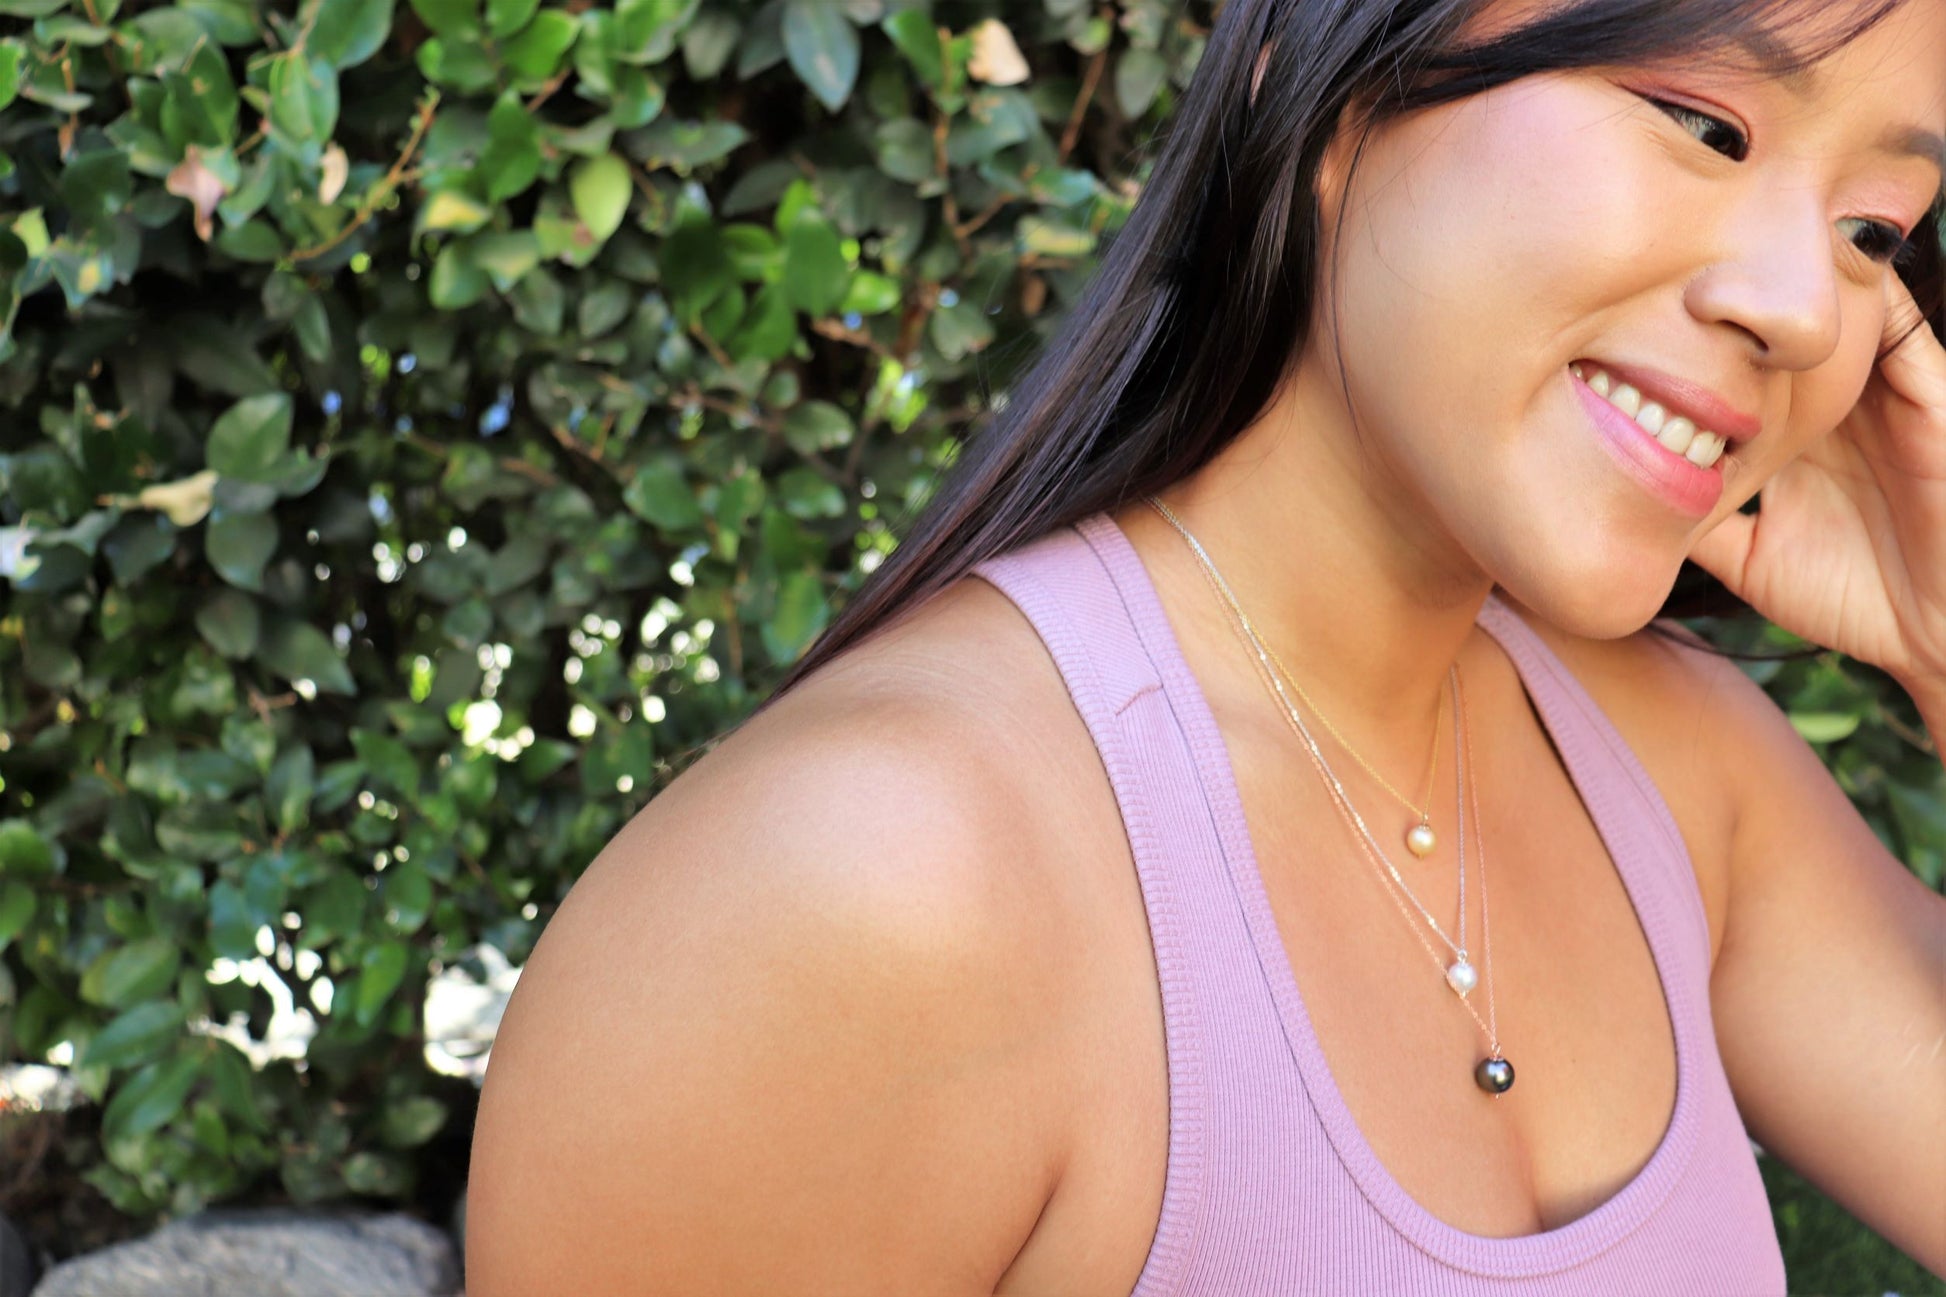 asian woman in purple tank top sitting in garden smiling and wearing three pearl pendant necklaces